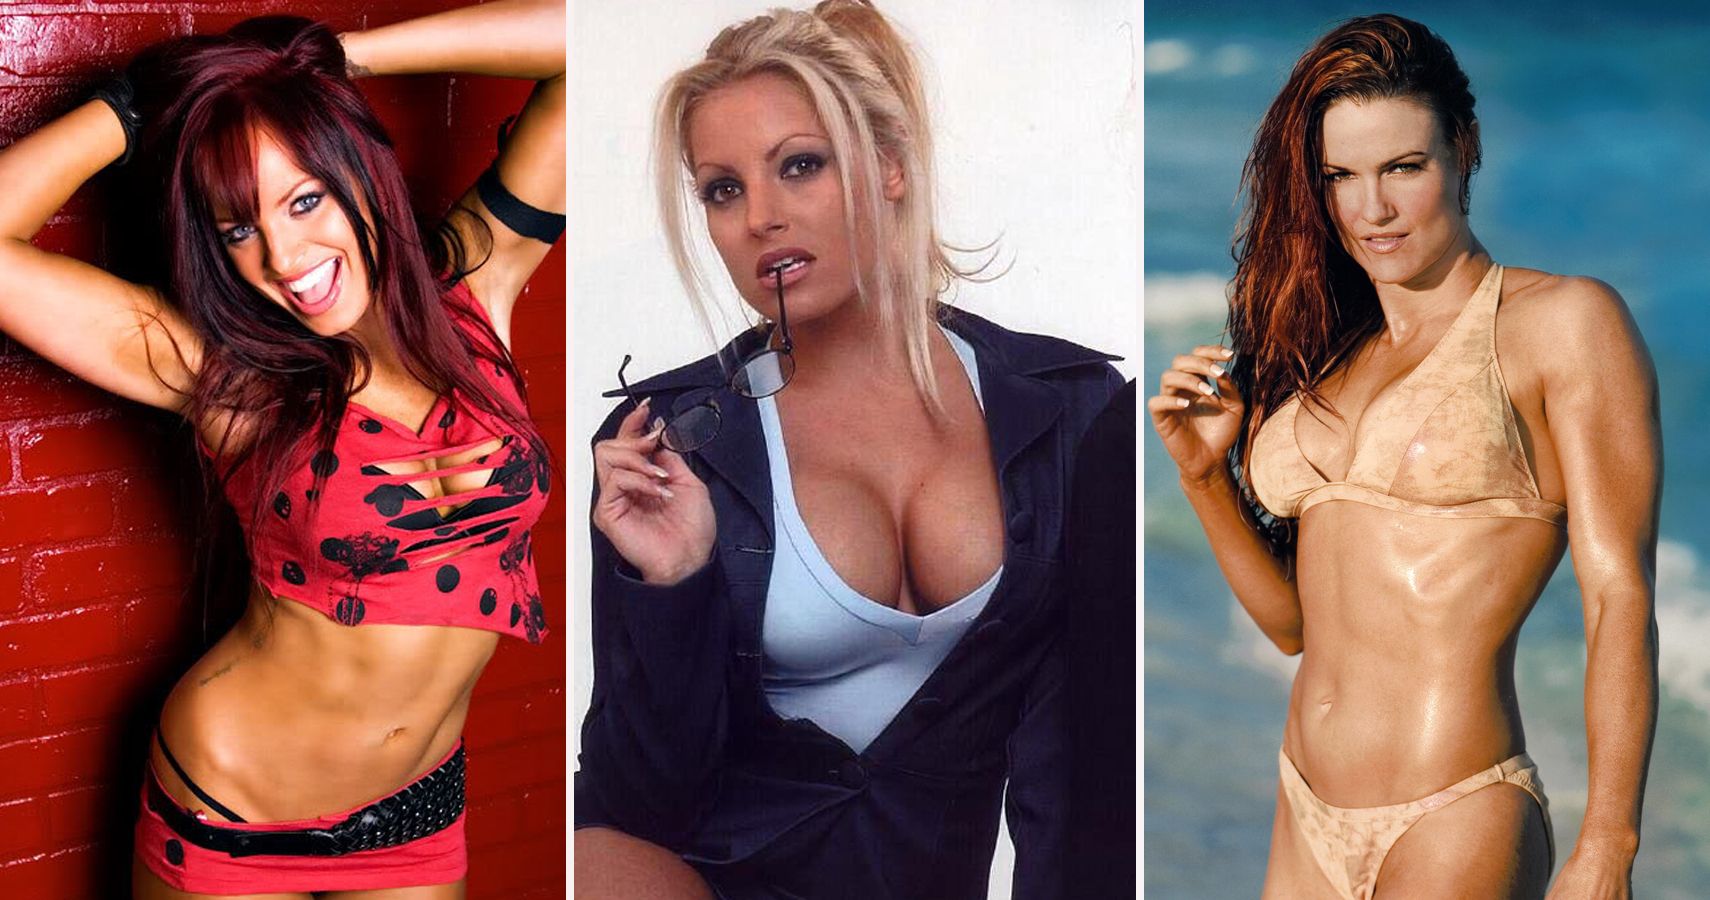 Wwe divas from the 2000s.